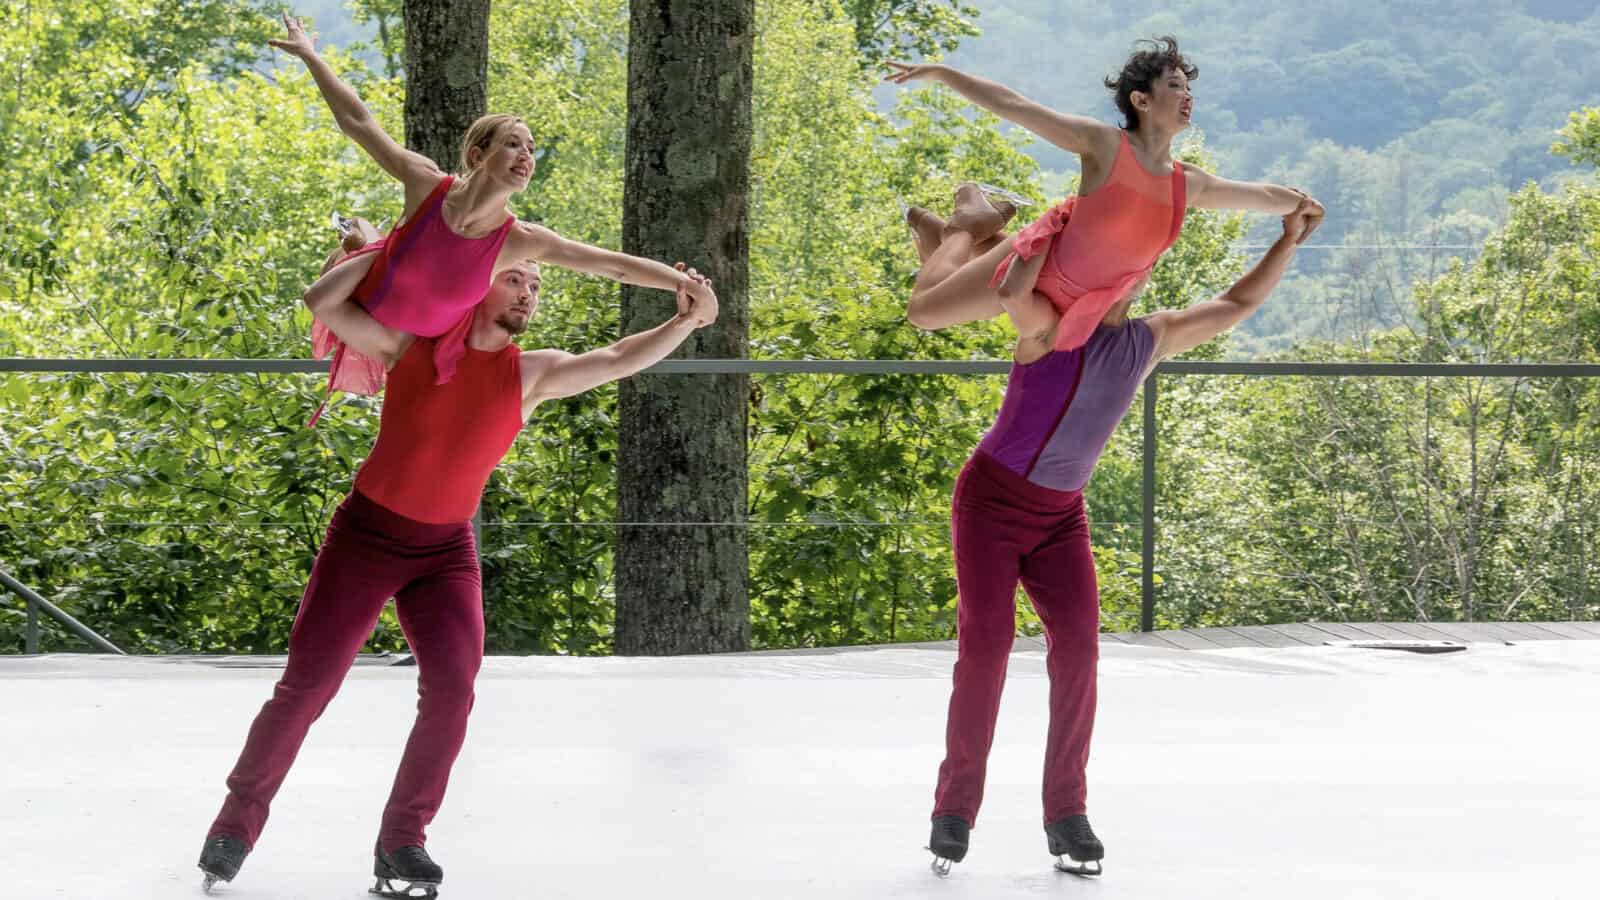 Liz Schmidt, Alper Ucar, Matej Silecky, and Sinead Kerr of Ice Dance International perform on the outdoor stage at Jacobs Pillow.